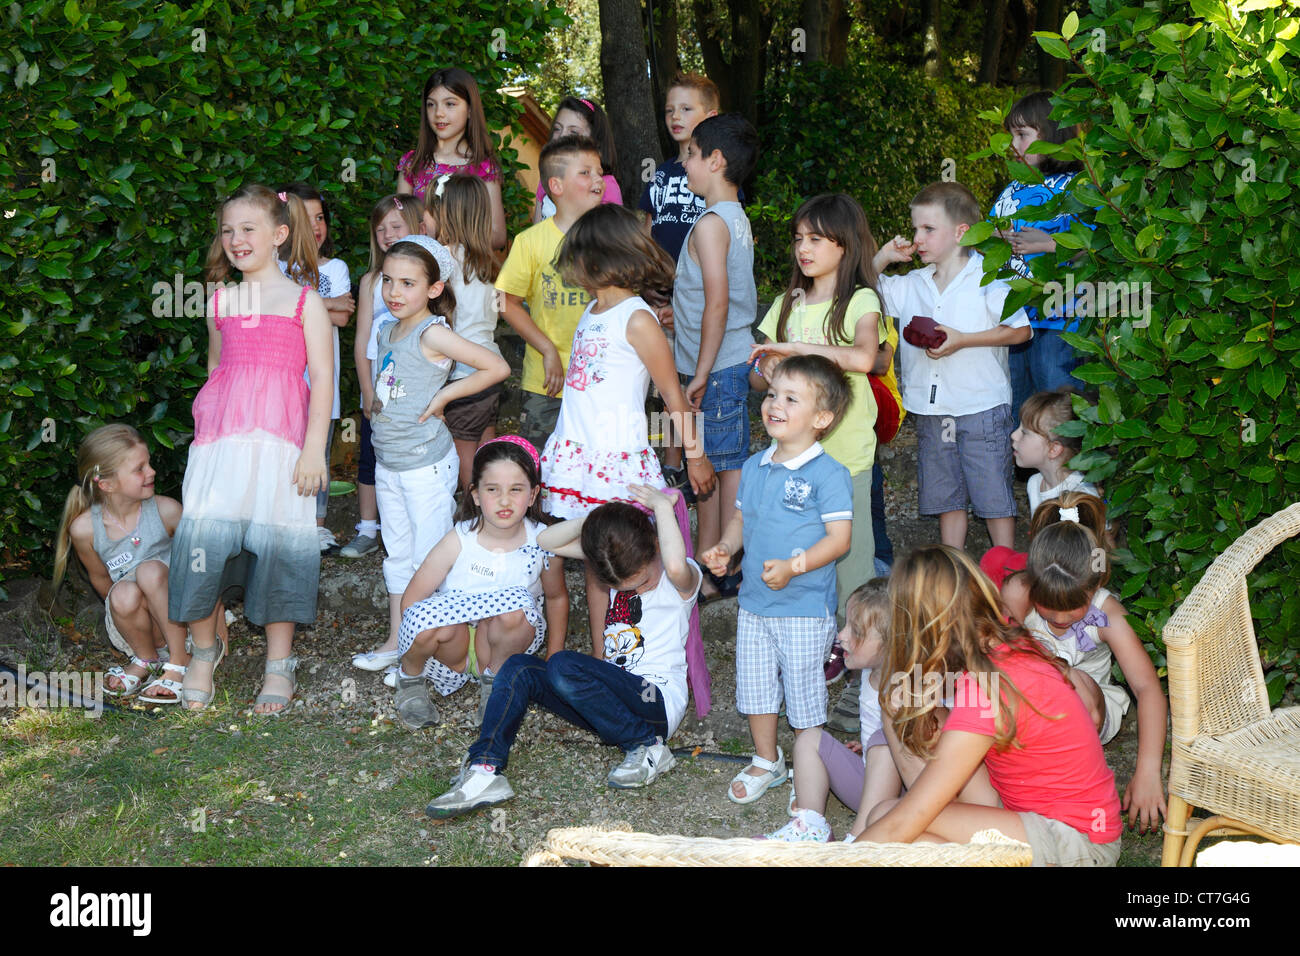 Group of children at a party Stock Photo